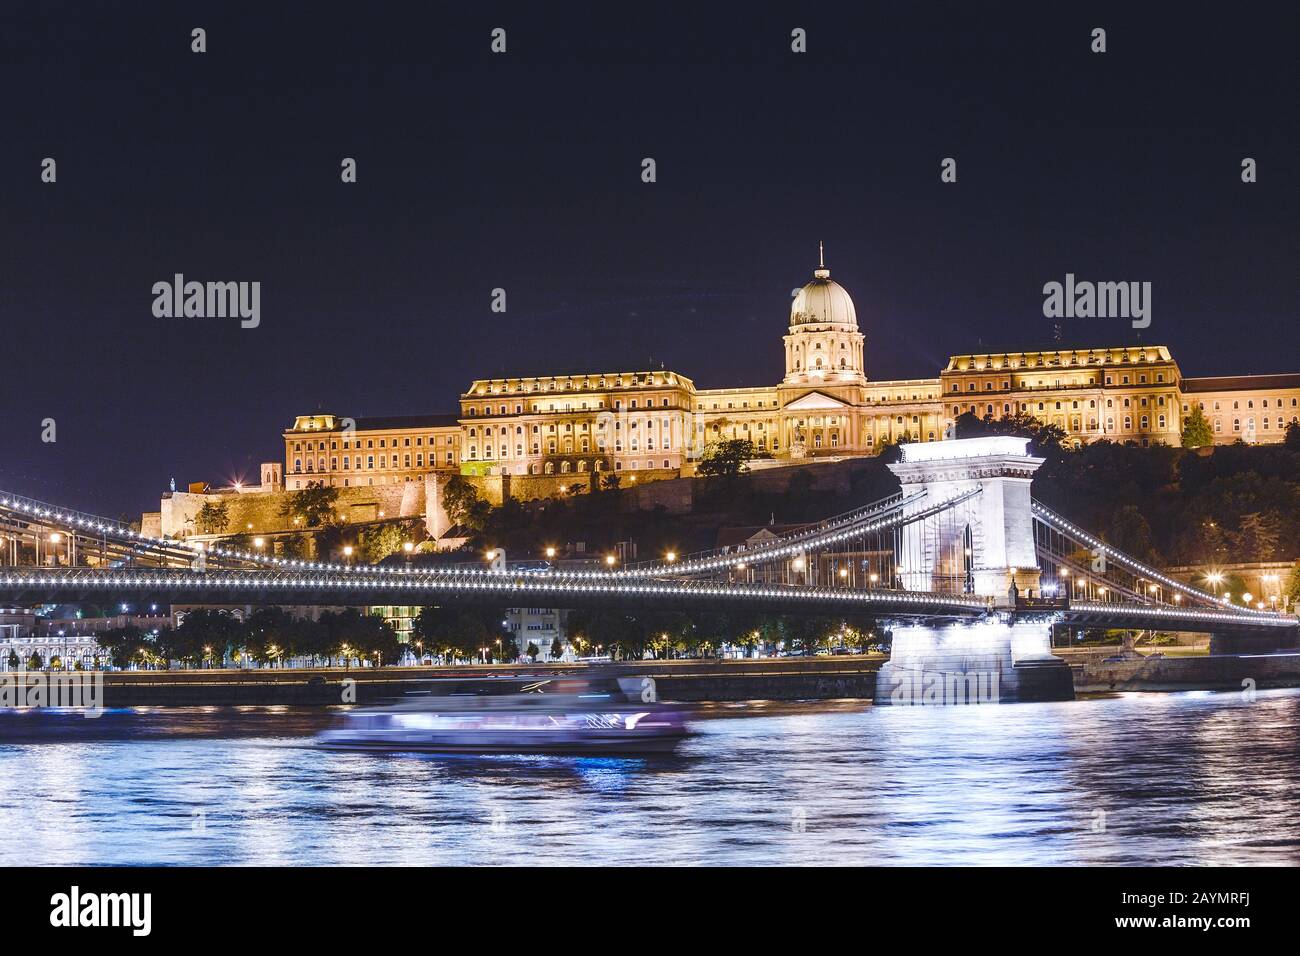 View of Budapest National Gallery and Szechenyi Chain Bridge at night from Danube river Stock Photo